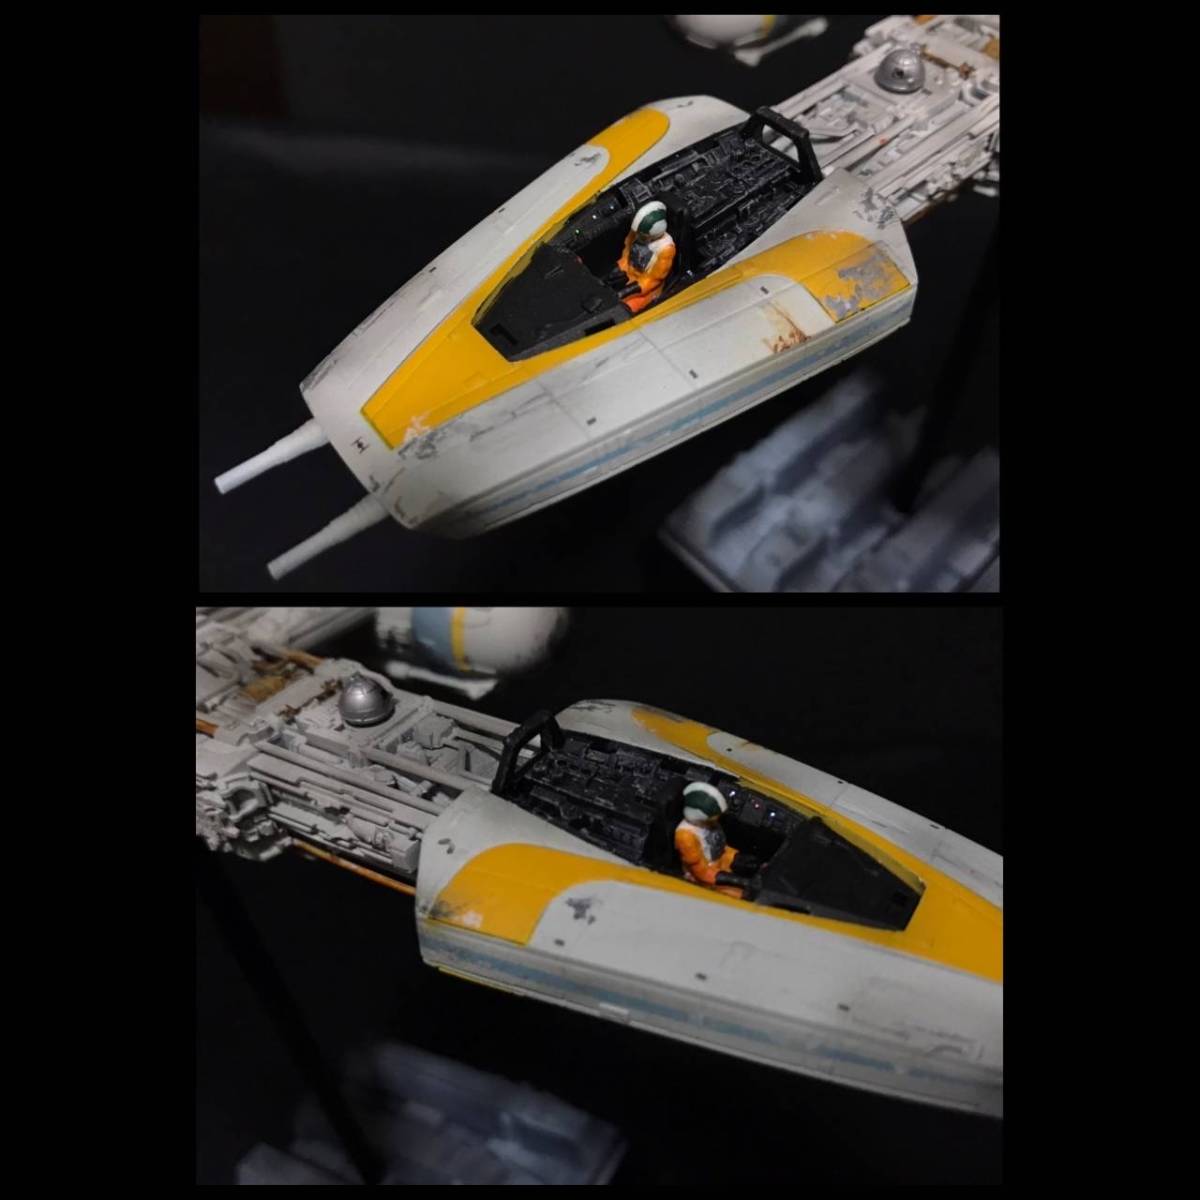  microcomputer installing illumination painted final product Pro p repeated reality Gold Leader Bandai 1/72 Y Wing Star Wars plastic model movie SF model 